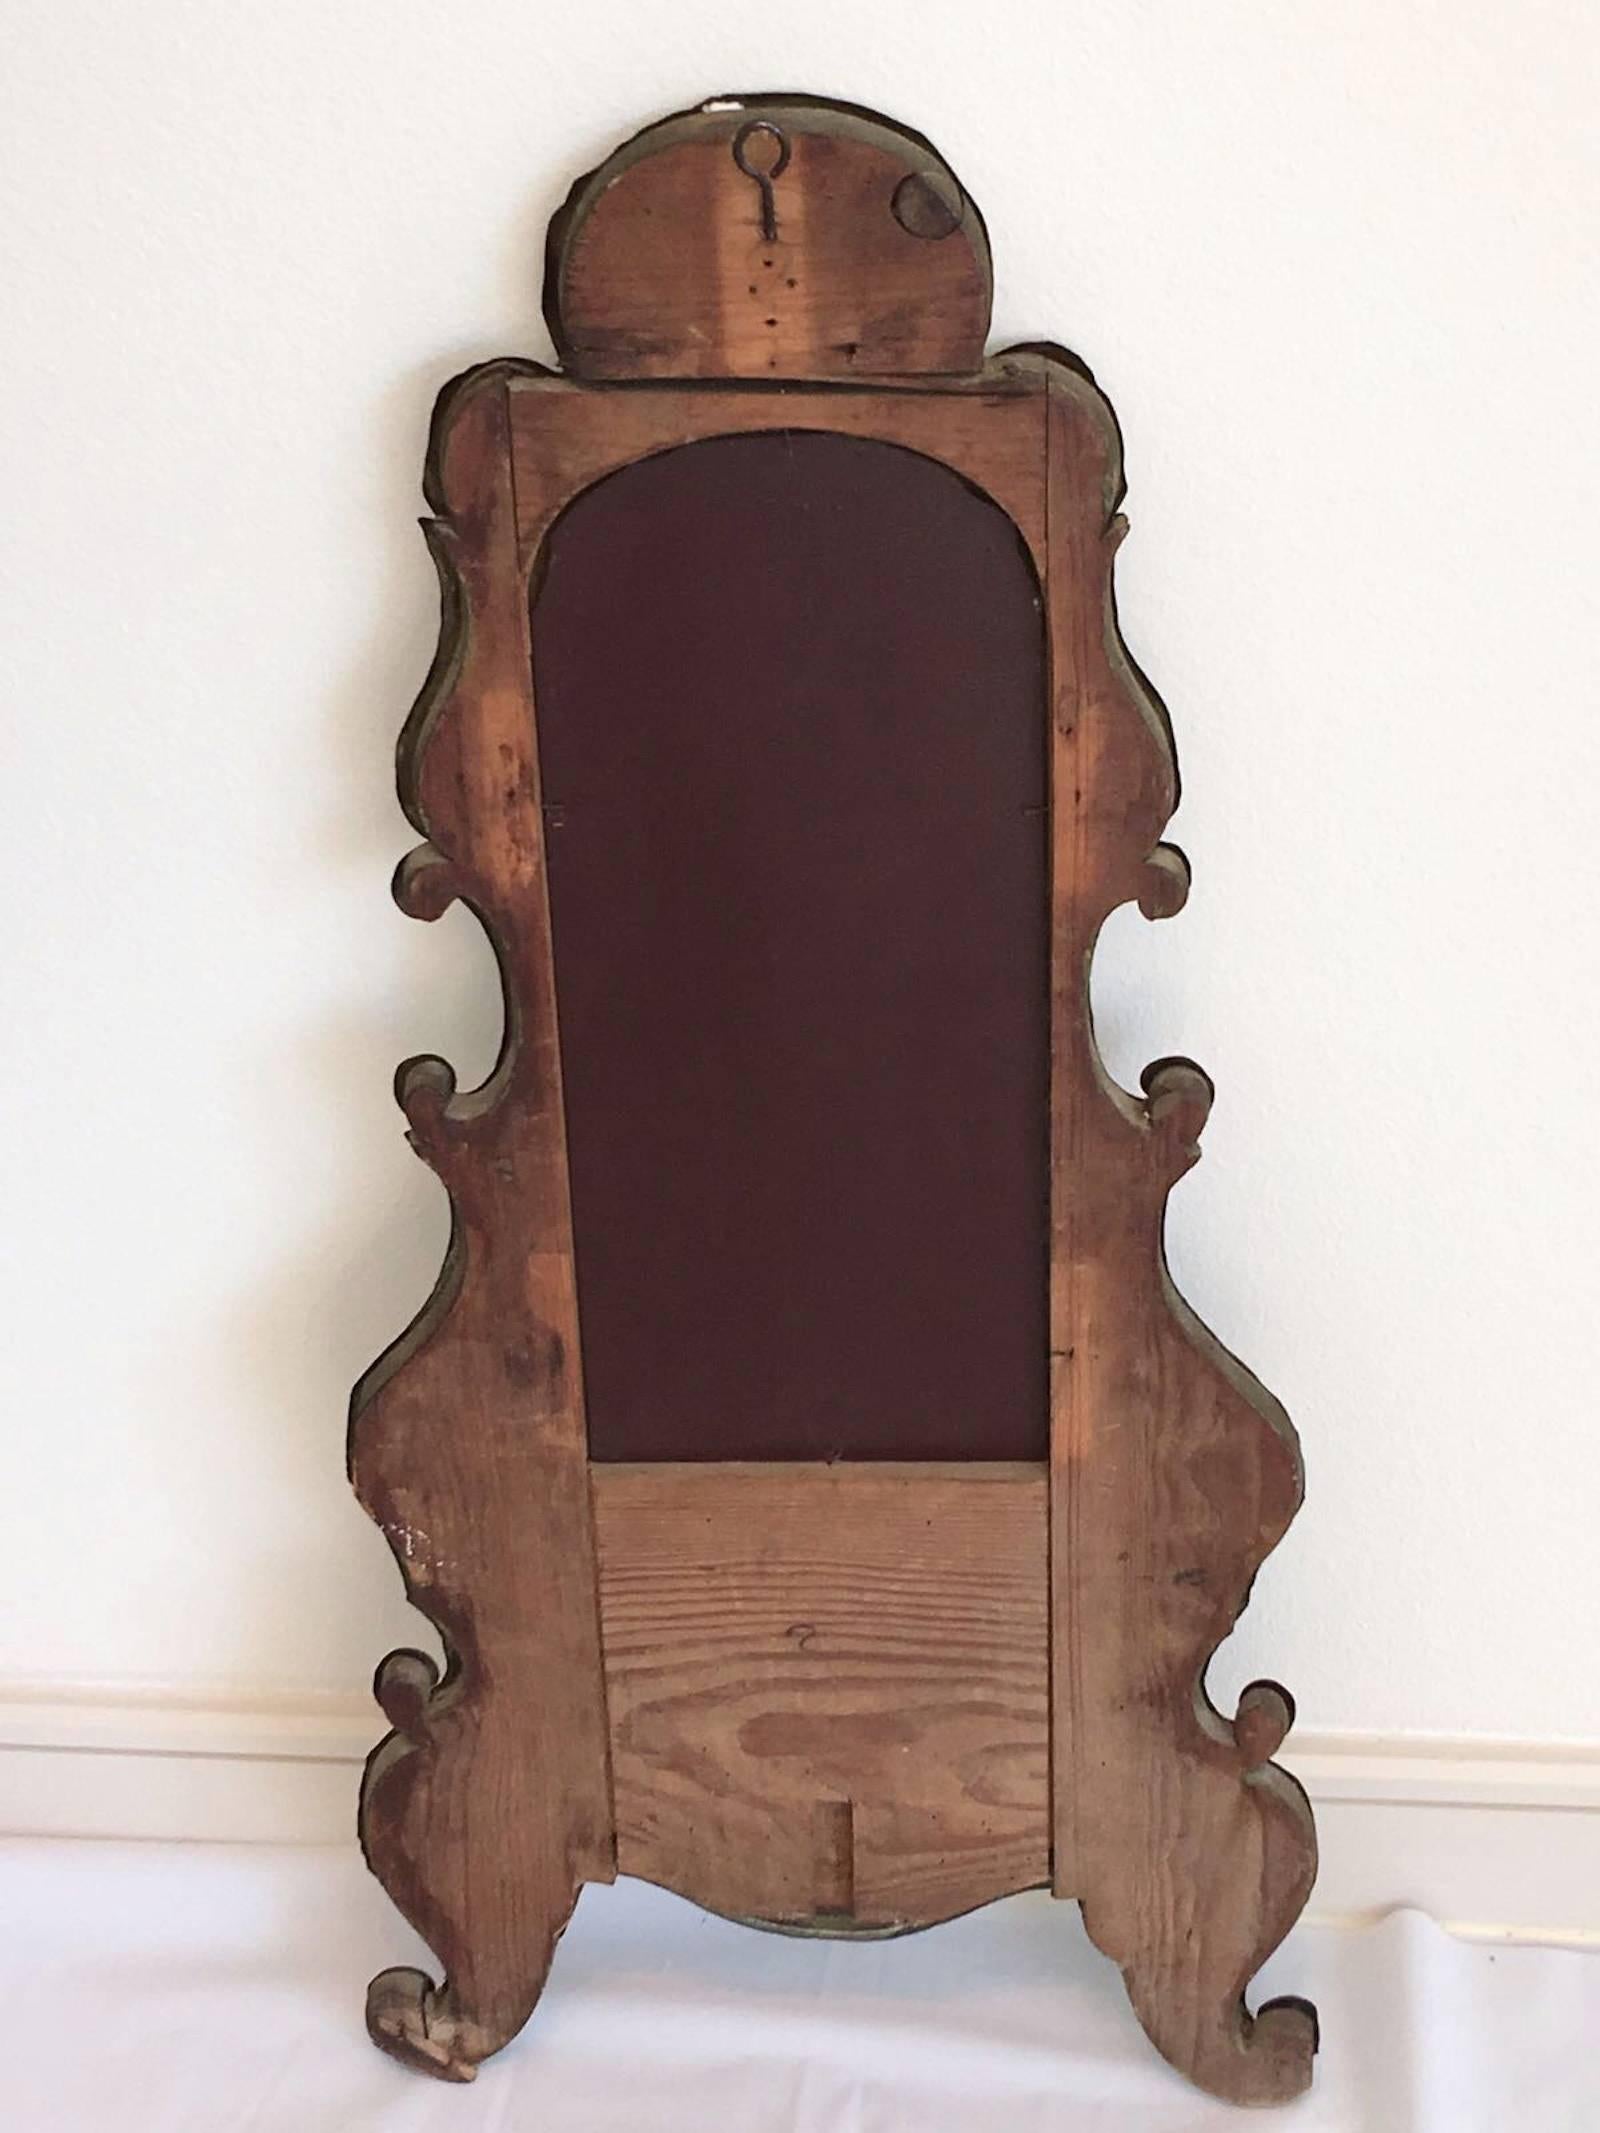 Antique German Baroque Wall Mirror Wood and Copper In Good Condition For Sale In Frisco, TX